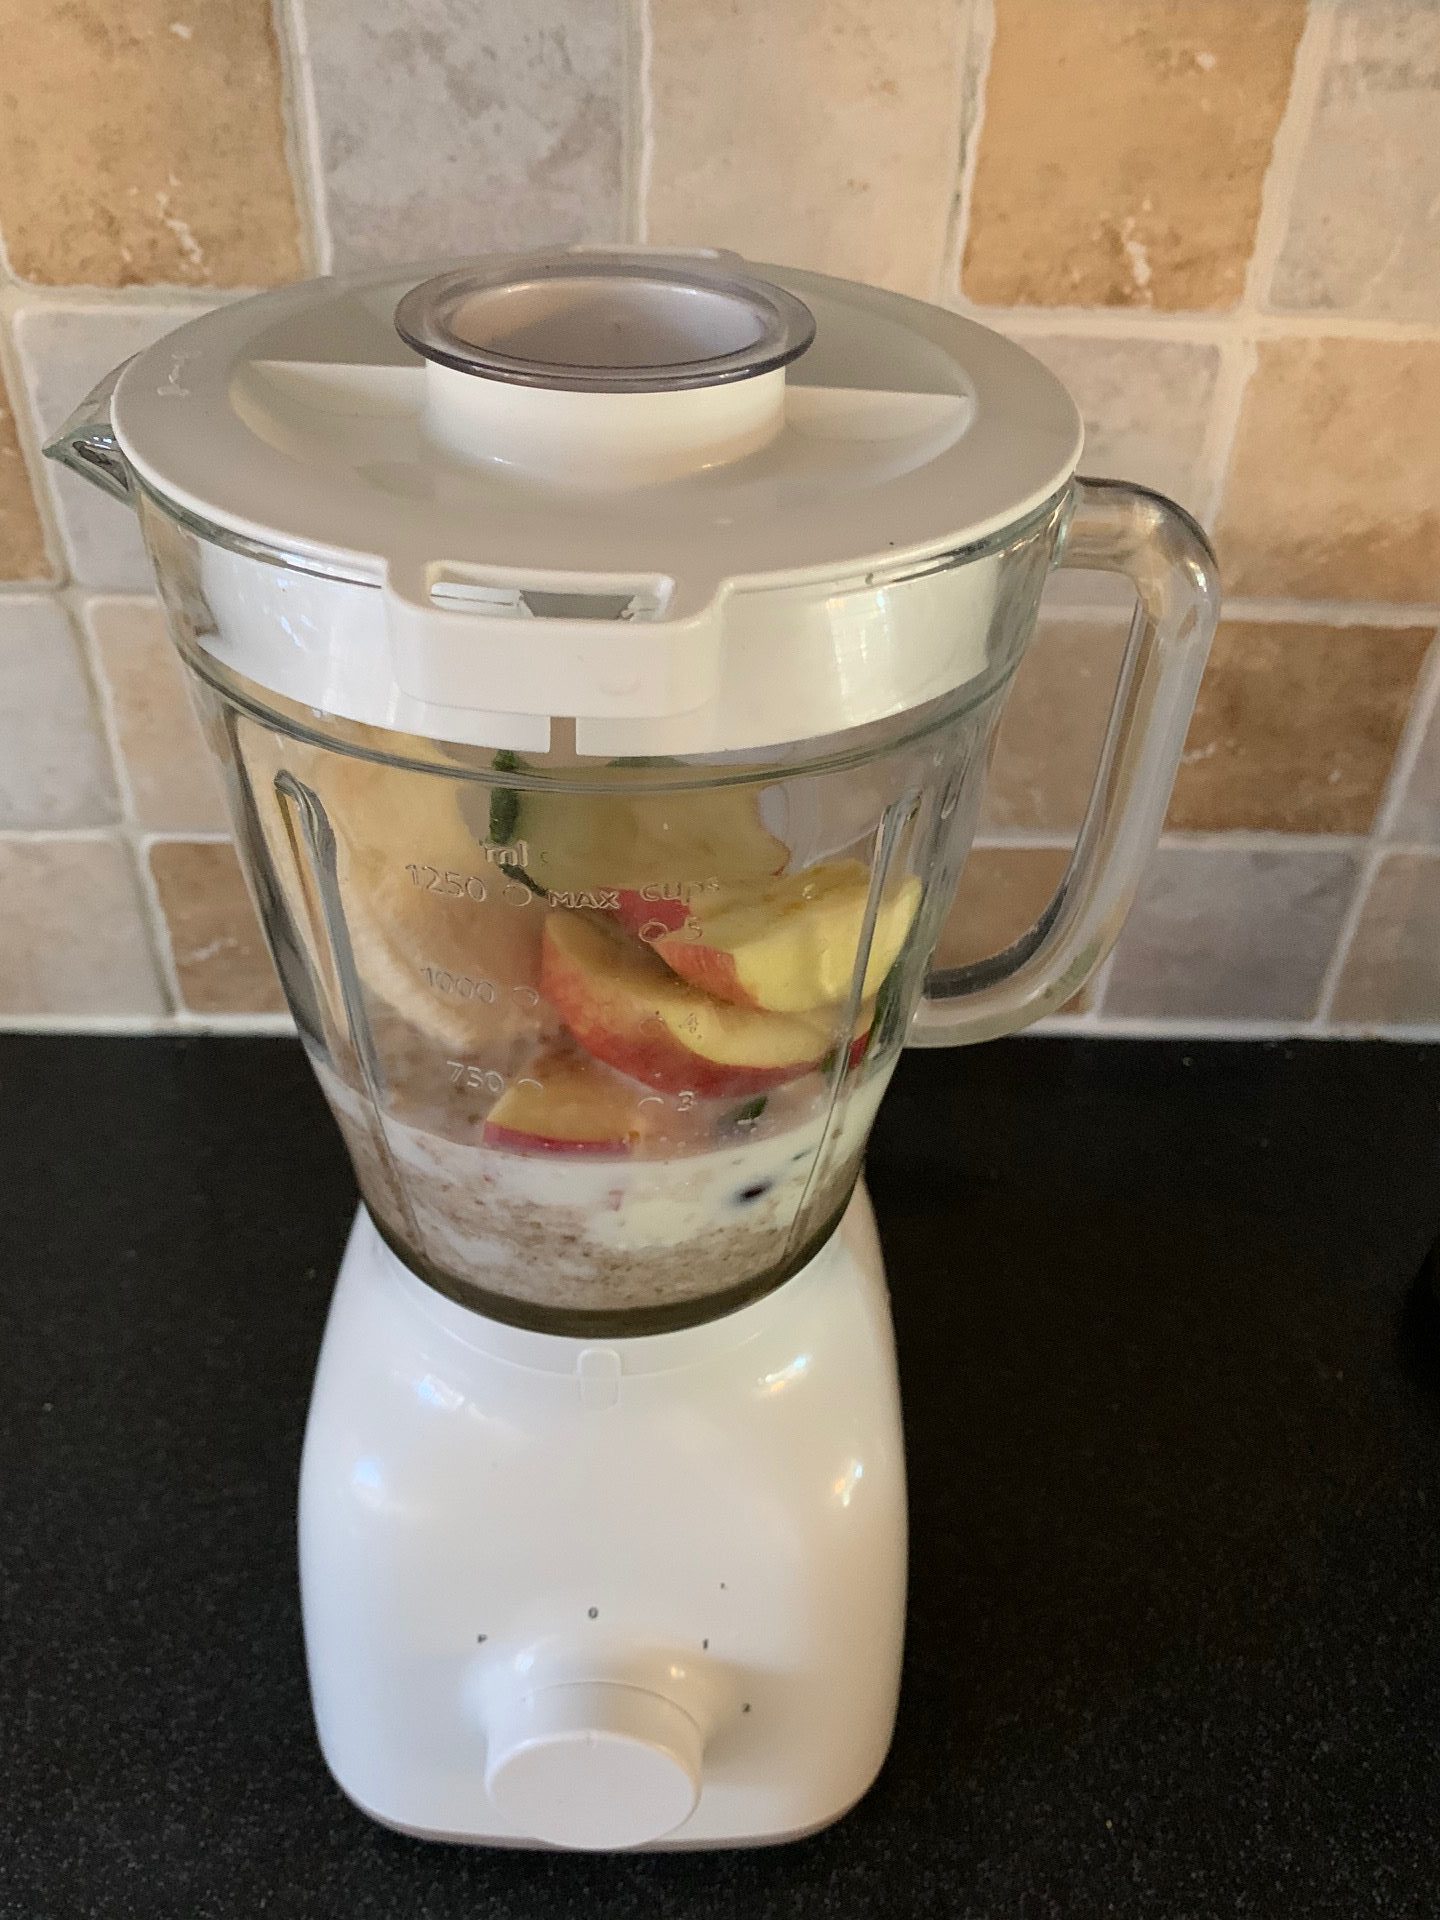 How To Make Smoothies In a Blender?